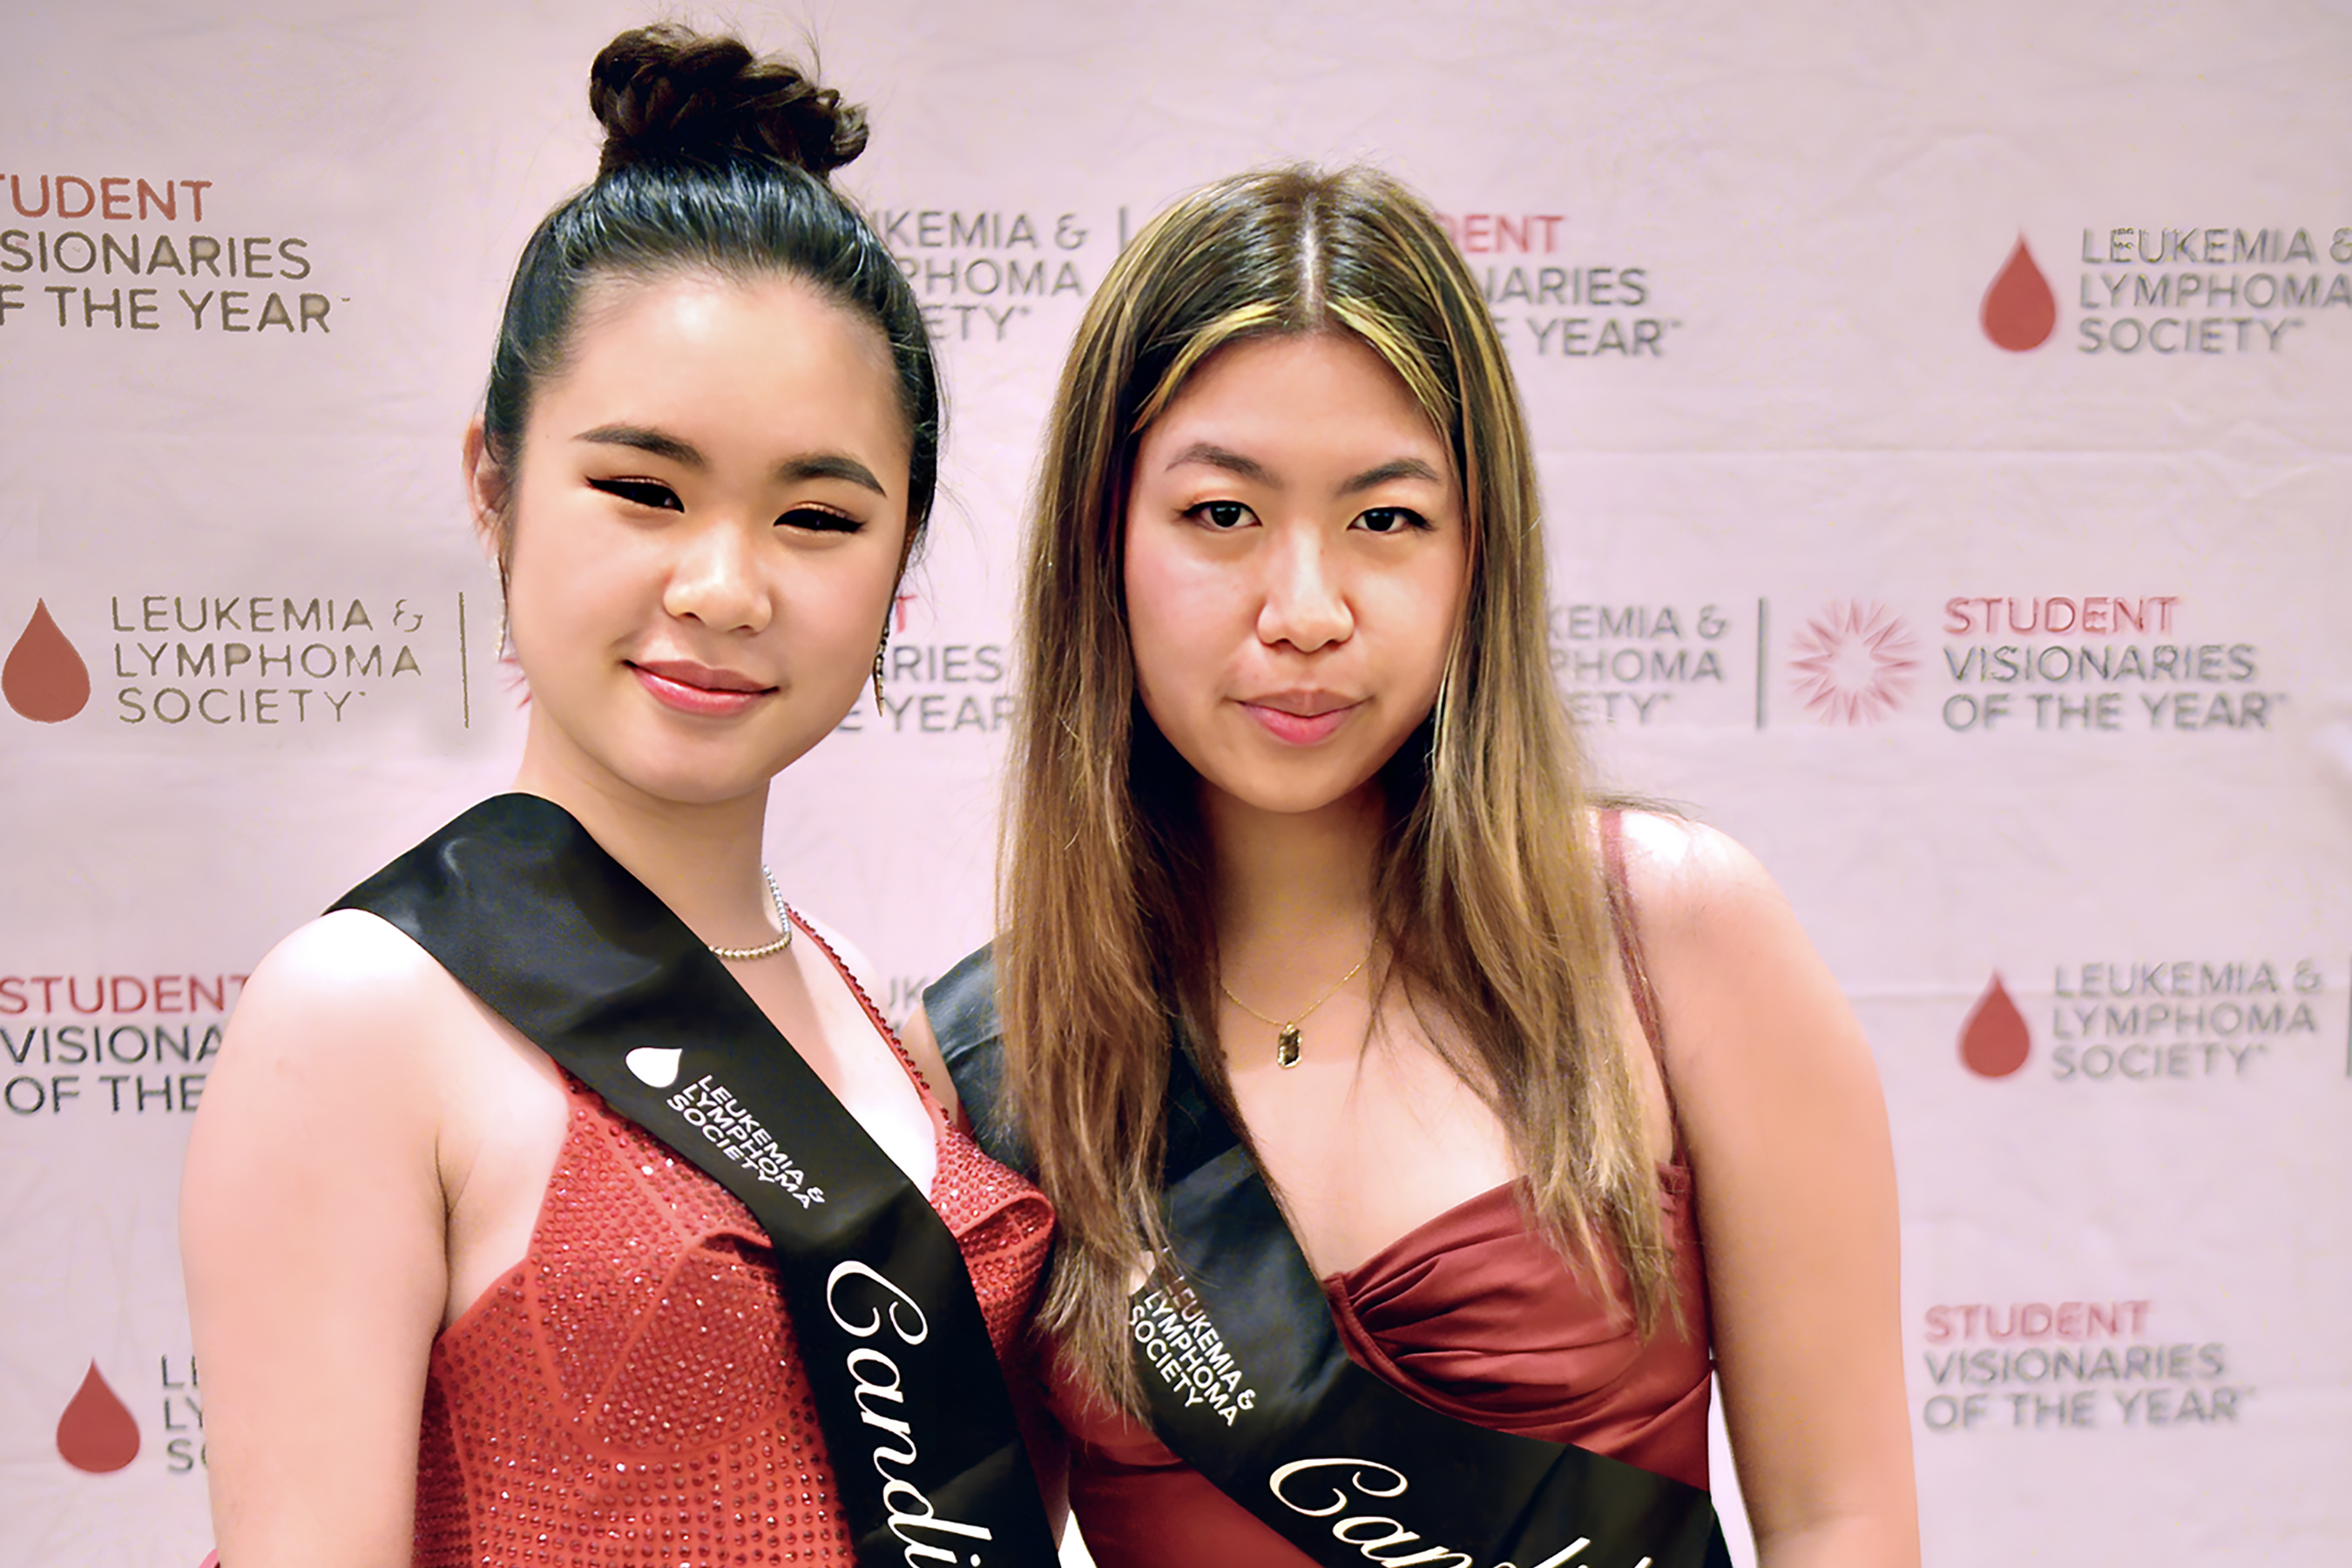 2023 National Student Visionaries of the Year runners-up team, Change Cancer’s Course, made up of co-candidates, 17-year-old Alyssa Xu of Webb School and 15-year-old Becky Luo of Sierra Canyon School in Los Angeles, CA.